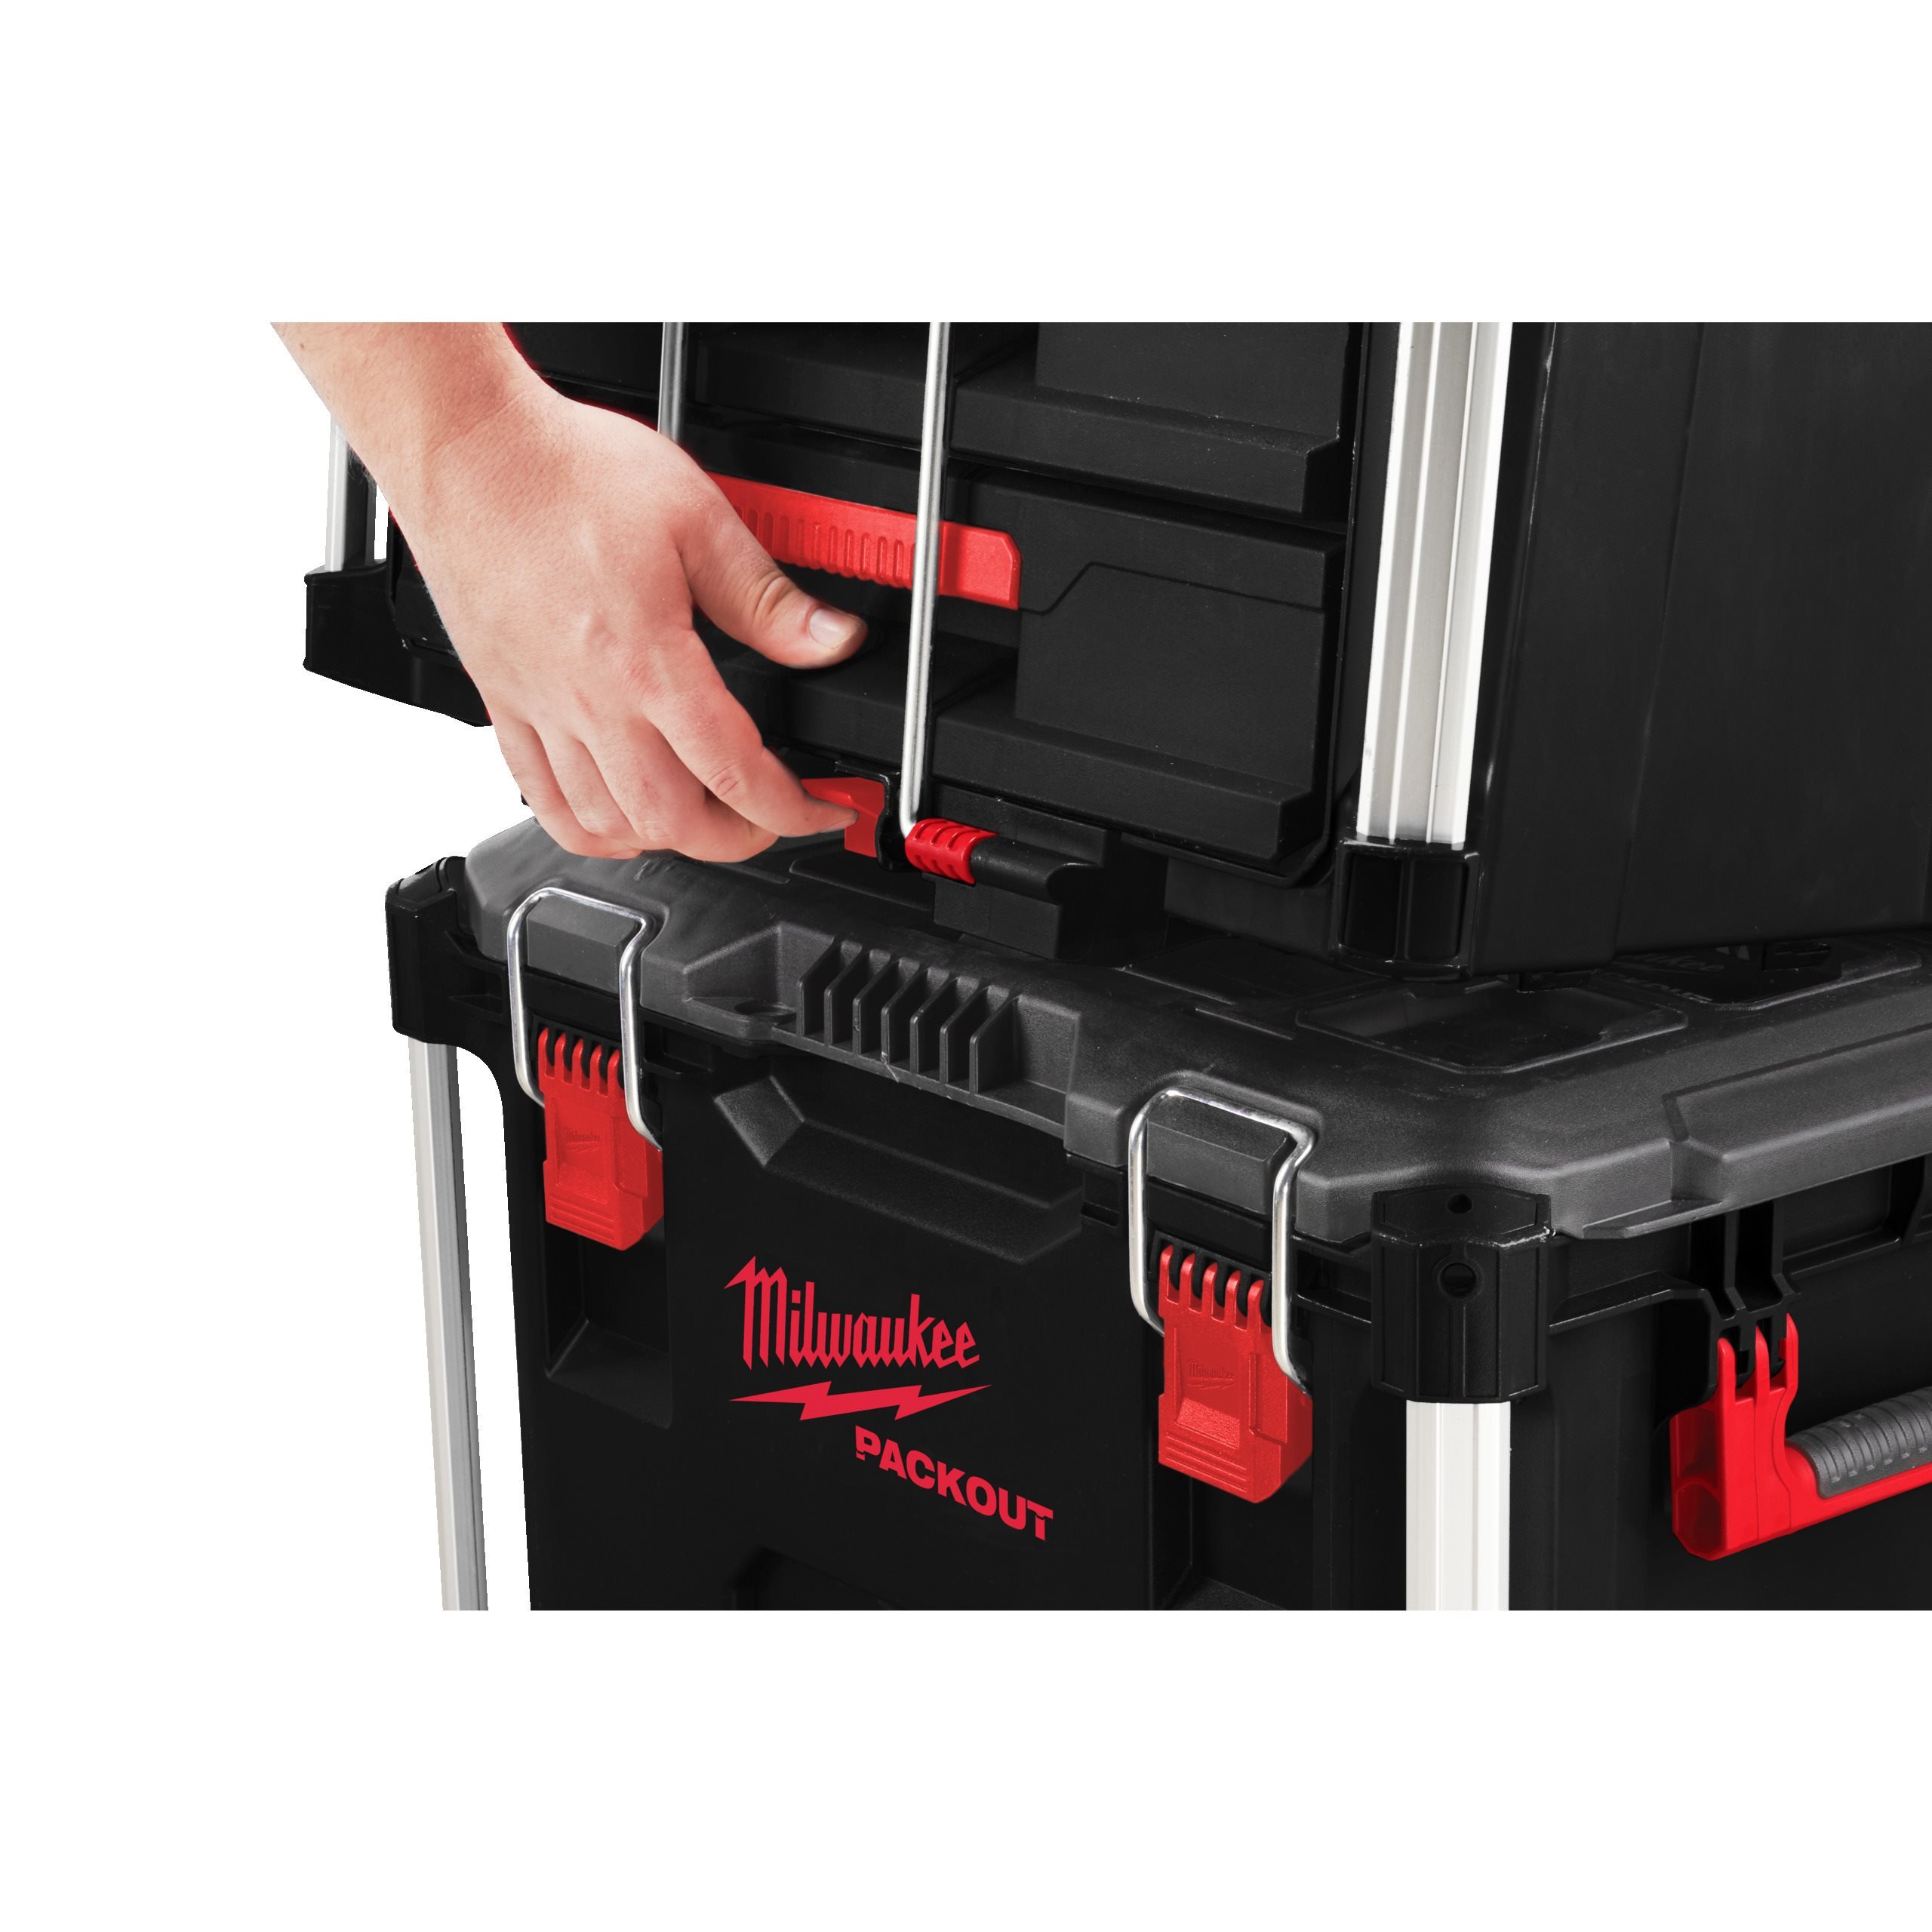 PACKOUT™ 3 drawer tool box